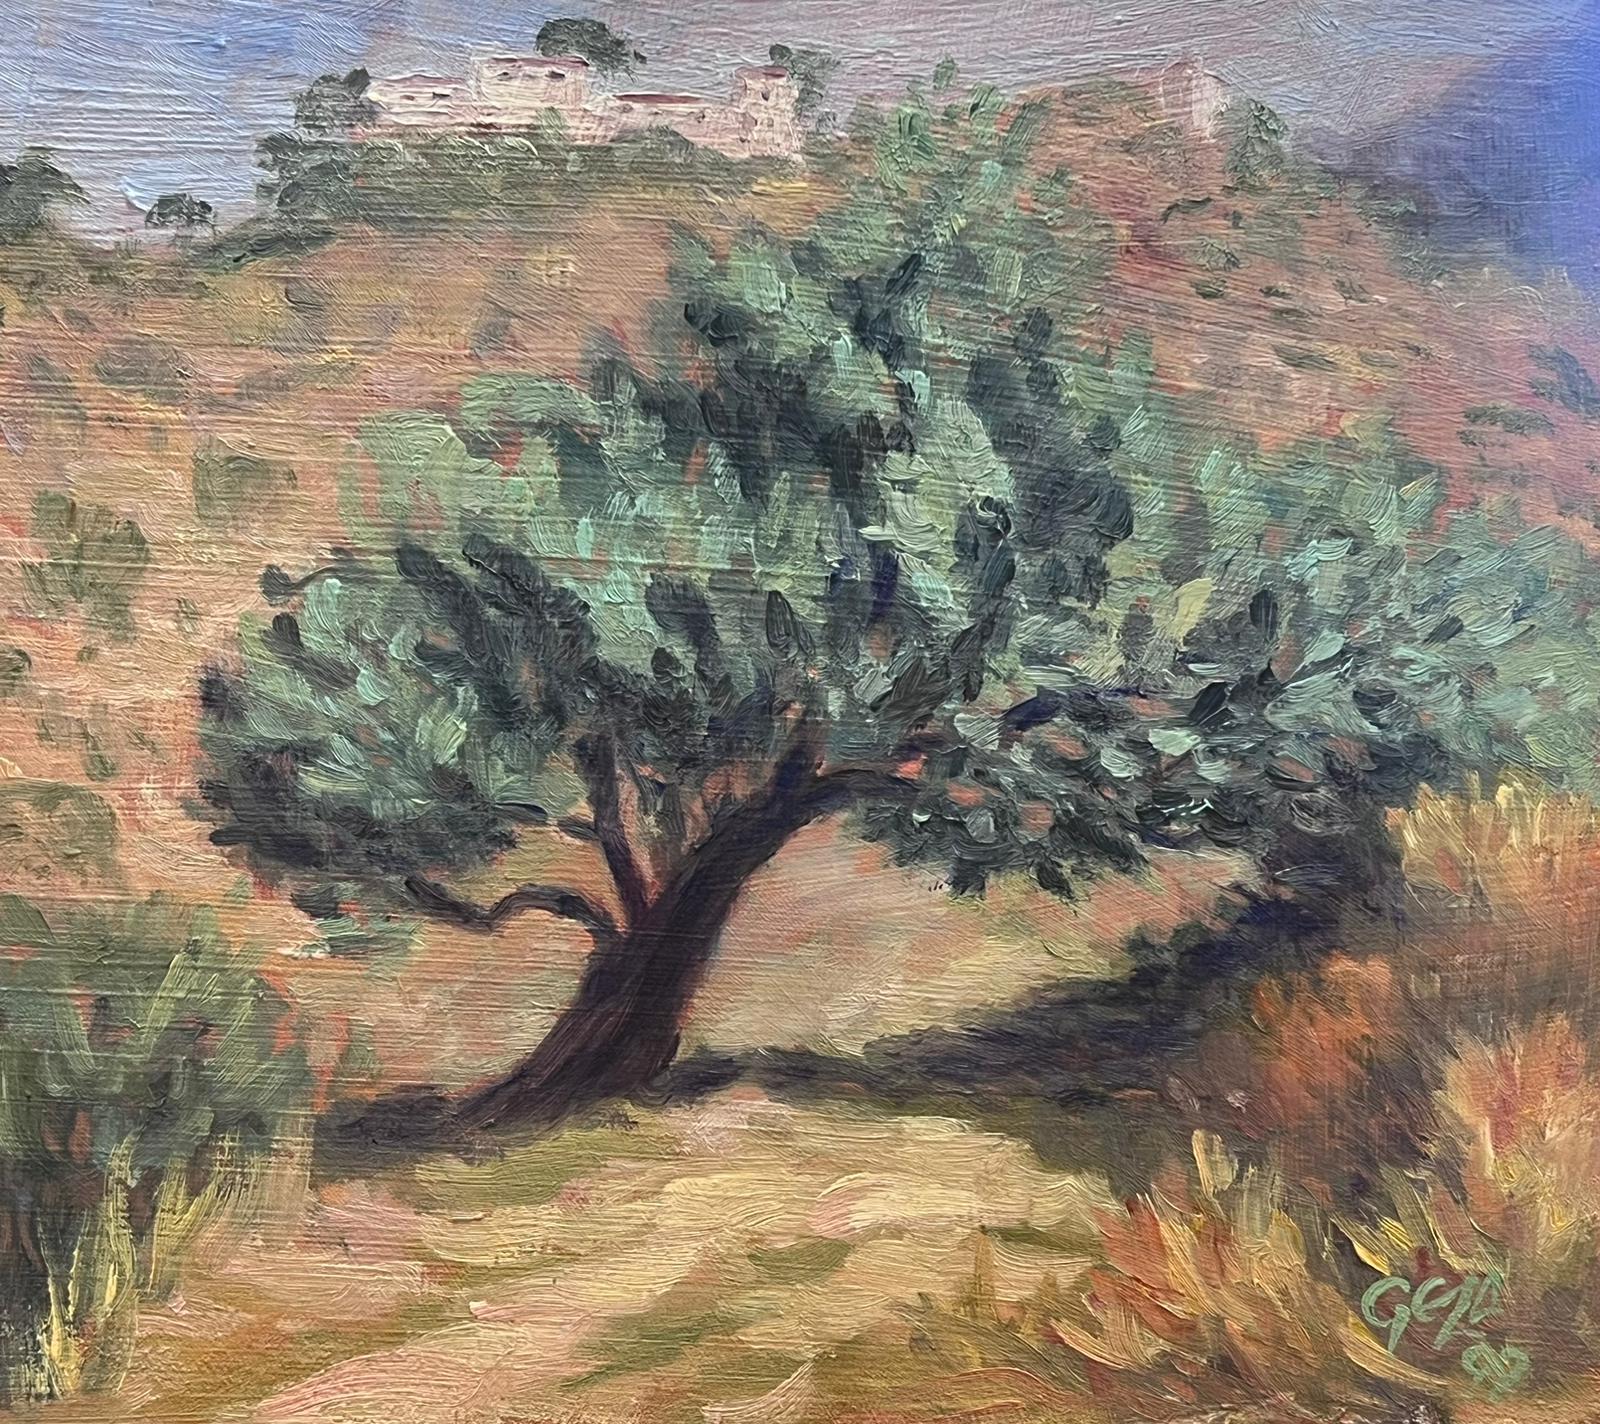 Geza Somerset-Paddon Landscape Painting - Wonky Olive Tree Landscape Contemporary British Oil Painting